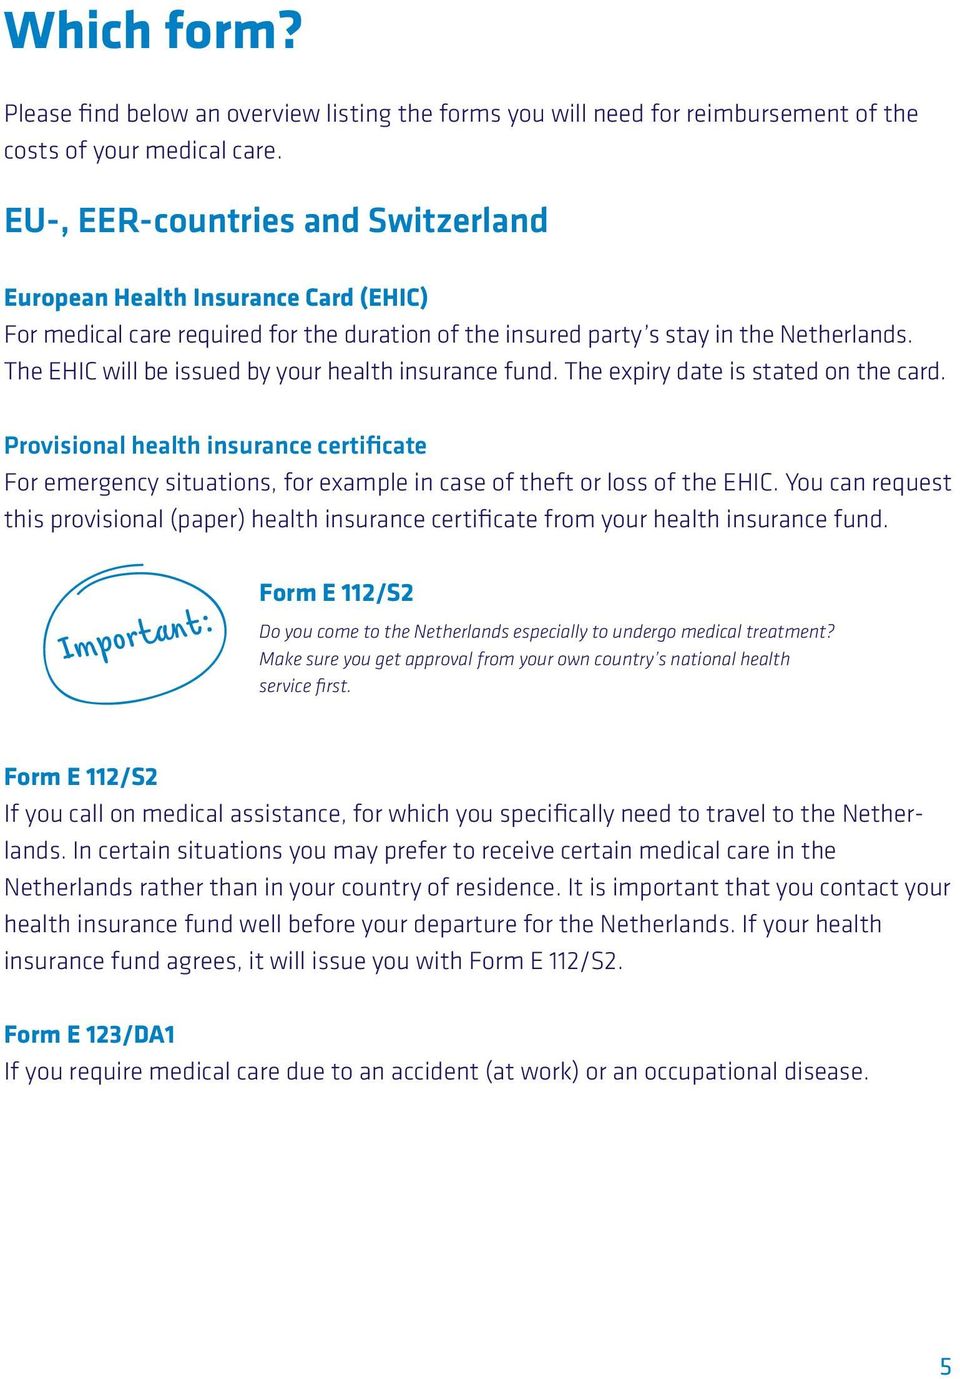 The EHIC will be issued by your health insurance fund. The expiry date is stated on the card.